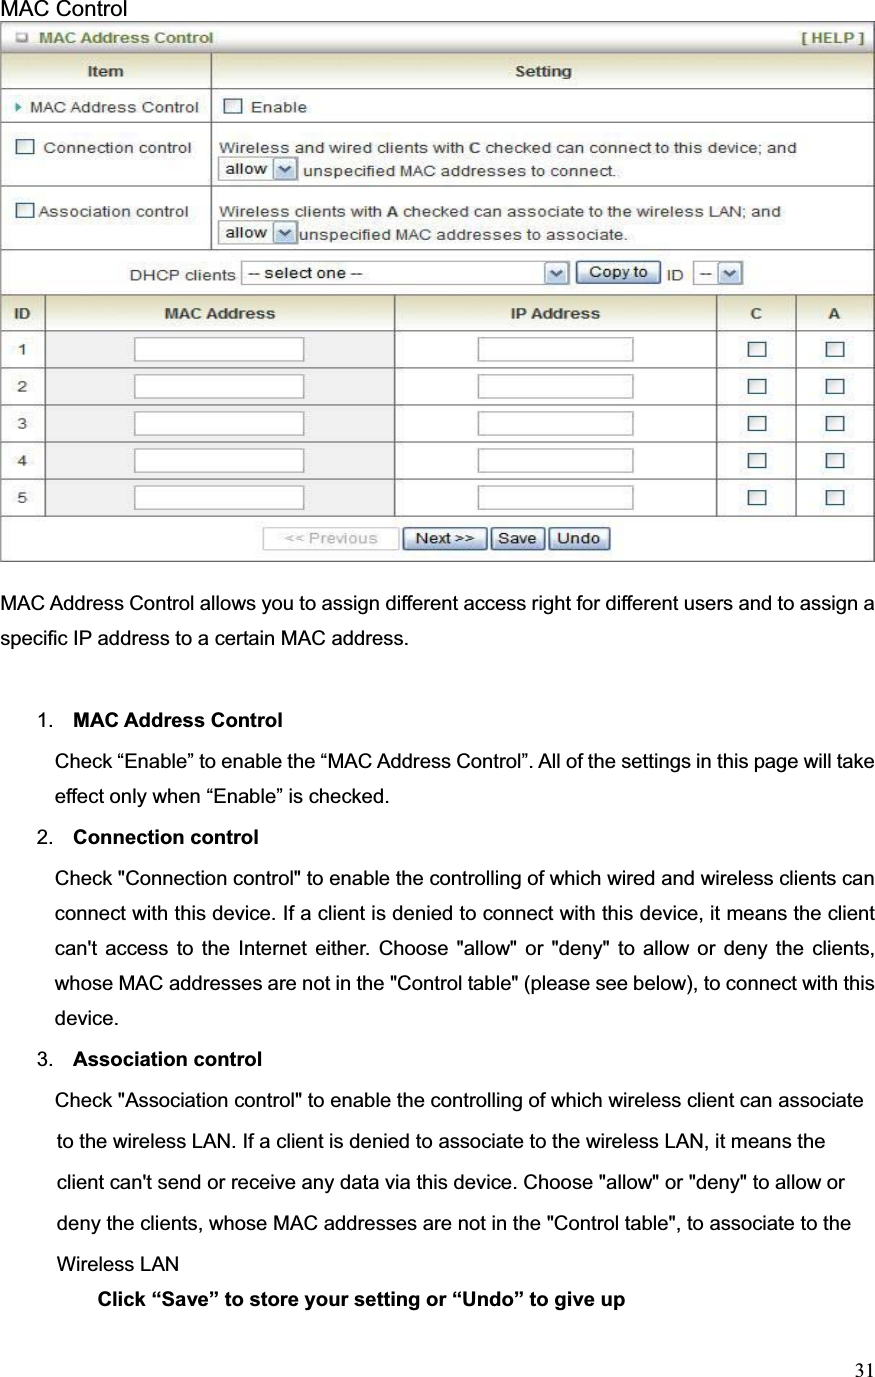 31MAC Control MAC Address Control allows you to assign different access right for different users and to assign a specific IP address to a certain MAC address. 1. MAC Address Control   Check “Enable” to enable the “MAC Address Control”. All of the settings in this page will take effect only when “Enable” is checked.2. Connection controlCheck &quot;Connection control&quot; to enable the controlling of which wired and wireless clients can connect with this device. If a client is denied to connect with this device, it means the client can&apos;t access to the Internet either. Choose &quot;allow&quot; or &quot;deny&quot; to allow or deny the clients, whose MAC addresses are not in the &quot;Control table&quot; (please see below), to connect with this device. 3. Association control Check &quot;Association control&quot; to enable the controlling of which wireless client can associate             to the wireless LAN. If a client is denied to associate to the wireless LAN, it means the           client can&apos;t send or receive any data via this device. Choose &quot;allow&quot; or &quot;deny&quot; to allow or         deny the clients, whose MAC addresses are not in the &quot;Control table&quot;, to associate to the         Wireless LAN        Click “Save” to store your setting or “Undo” to give up